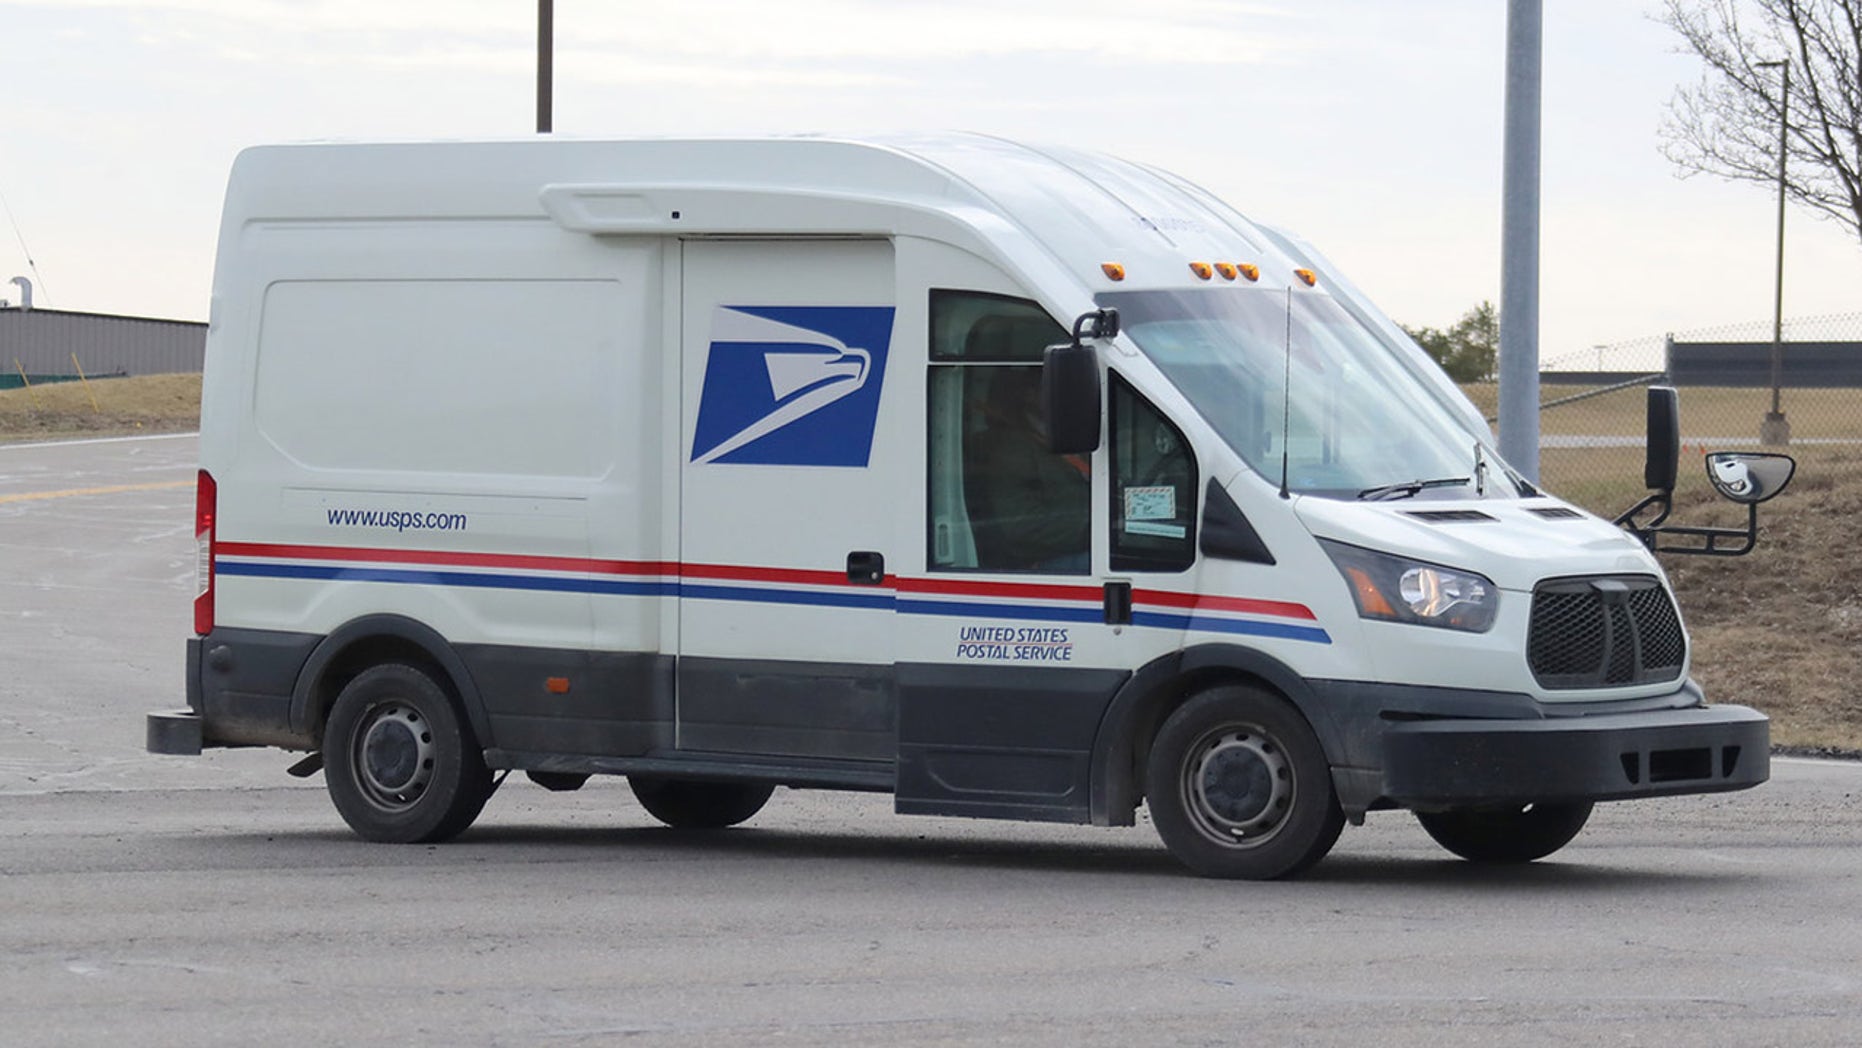 What will the new Post Office delivery vehicle look like?| Off-Topic Discussion forum